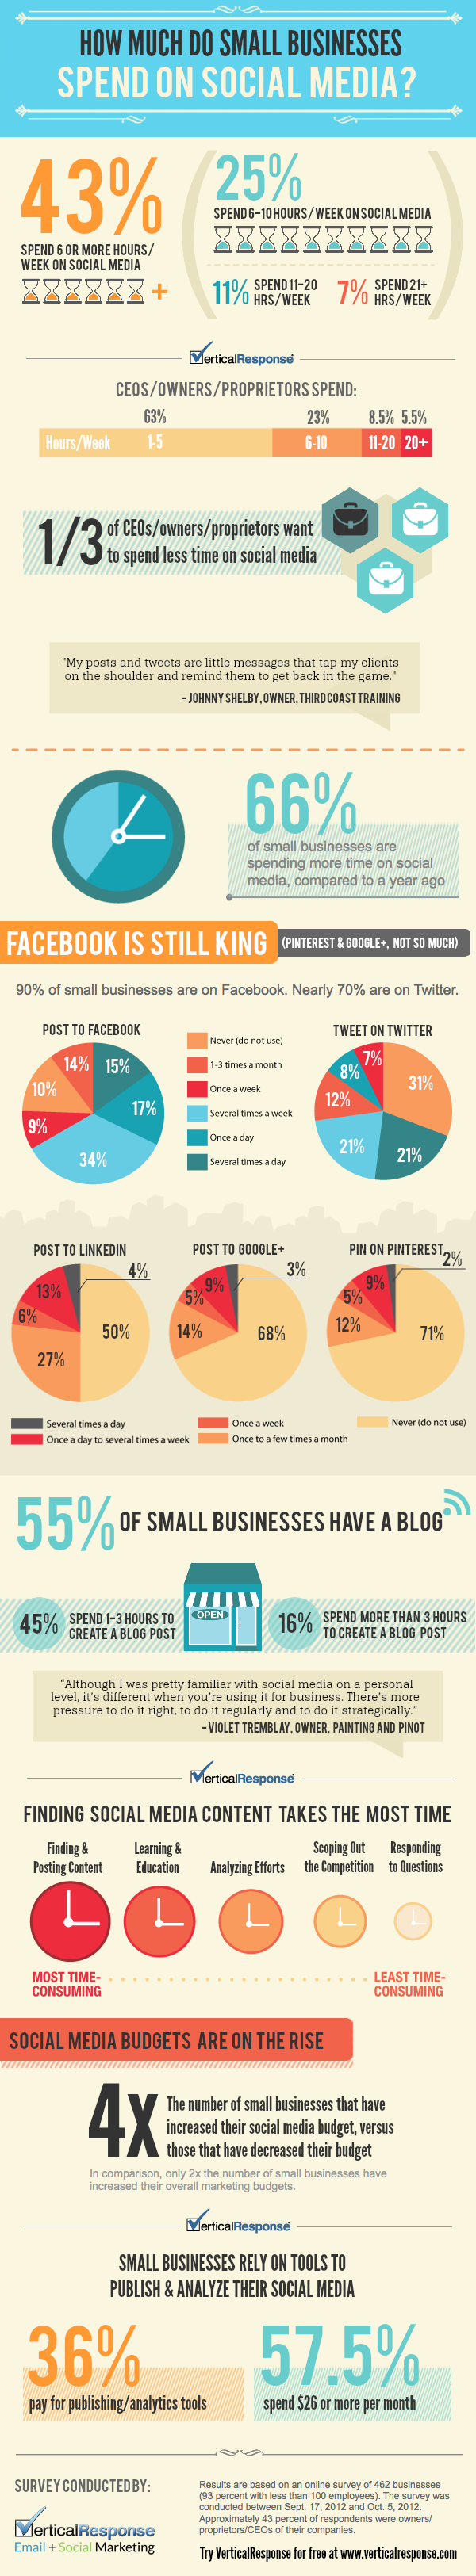 Time small business spend on social media